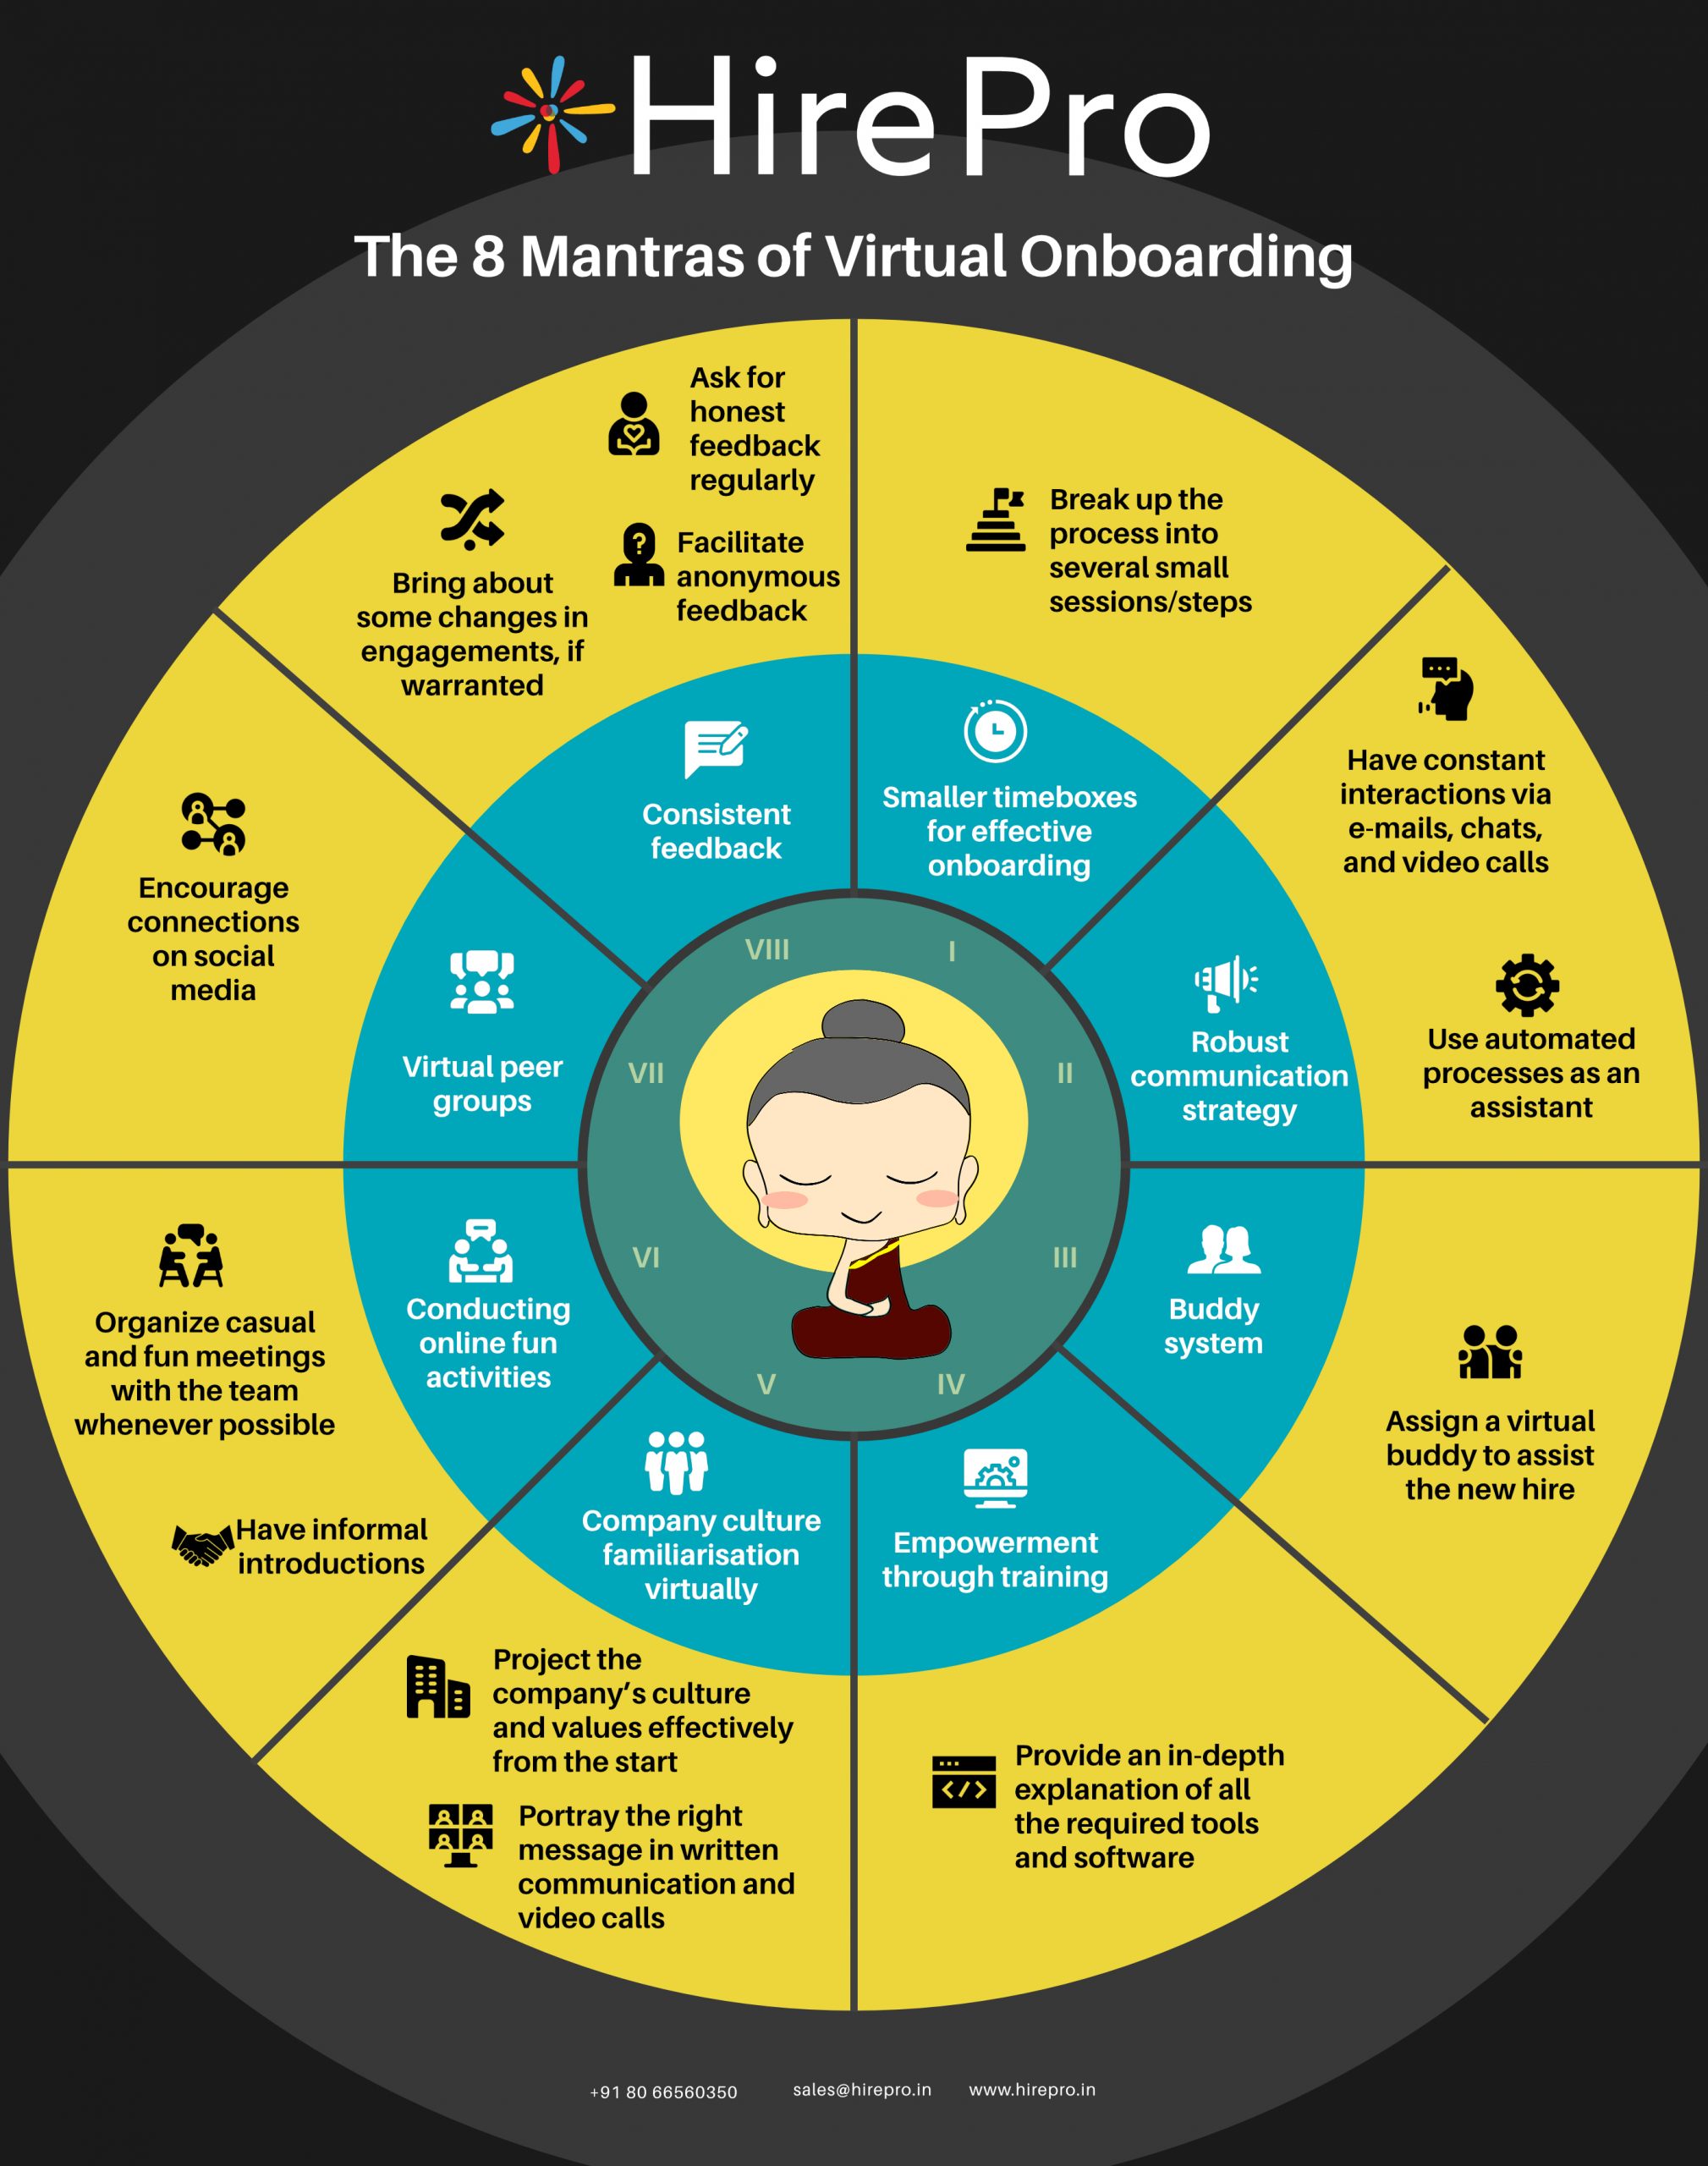 The 8 Mantras of Virtual Onboarding